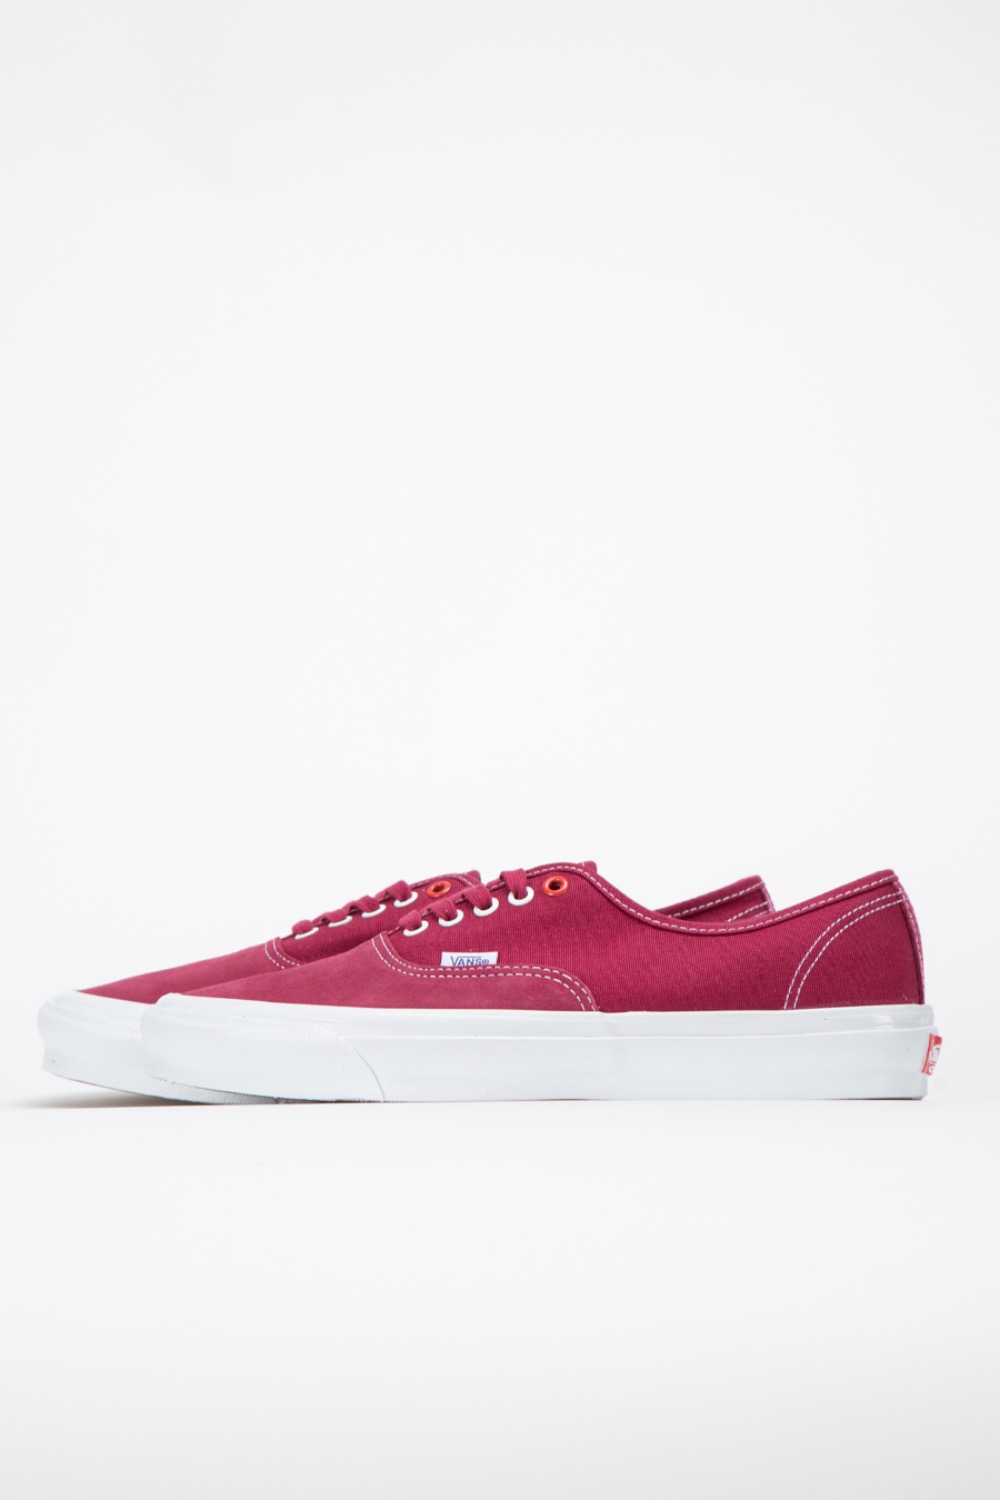 OG AUTHENTIC LX(RAY BARBEE) DARK RED